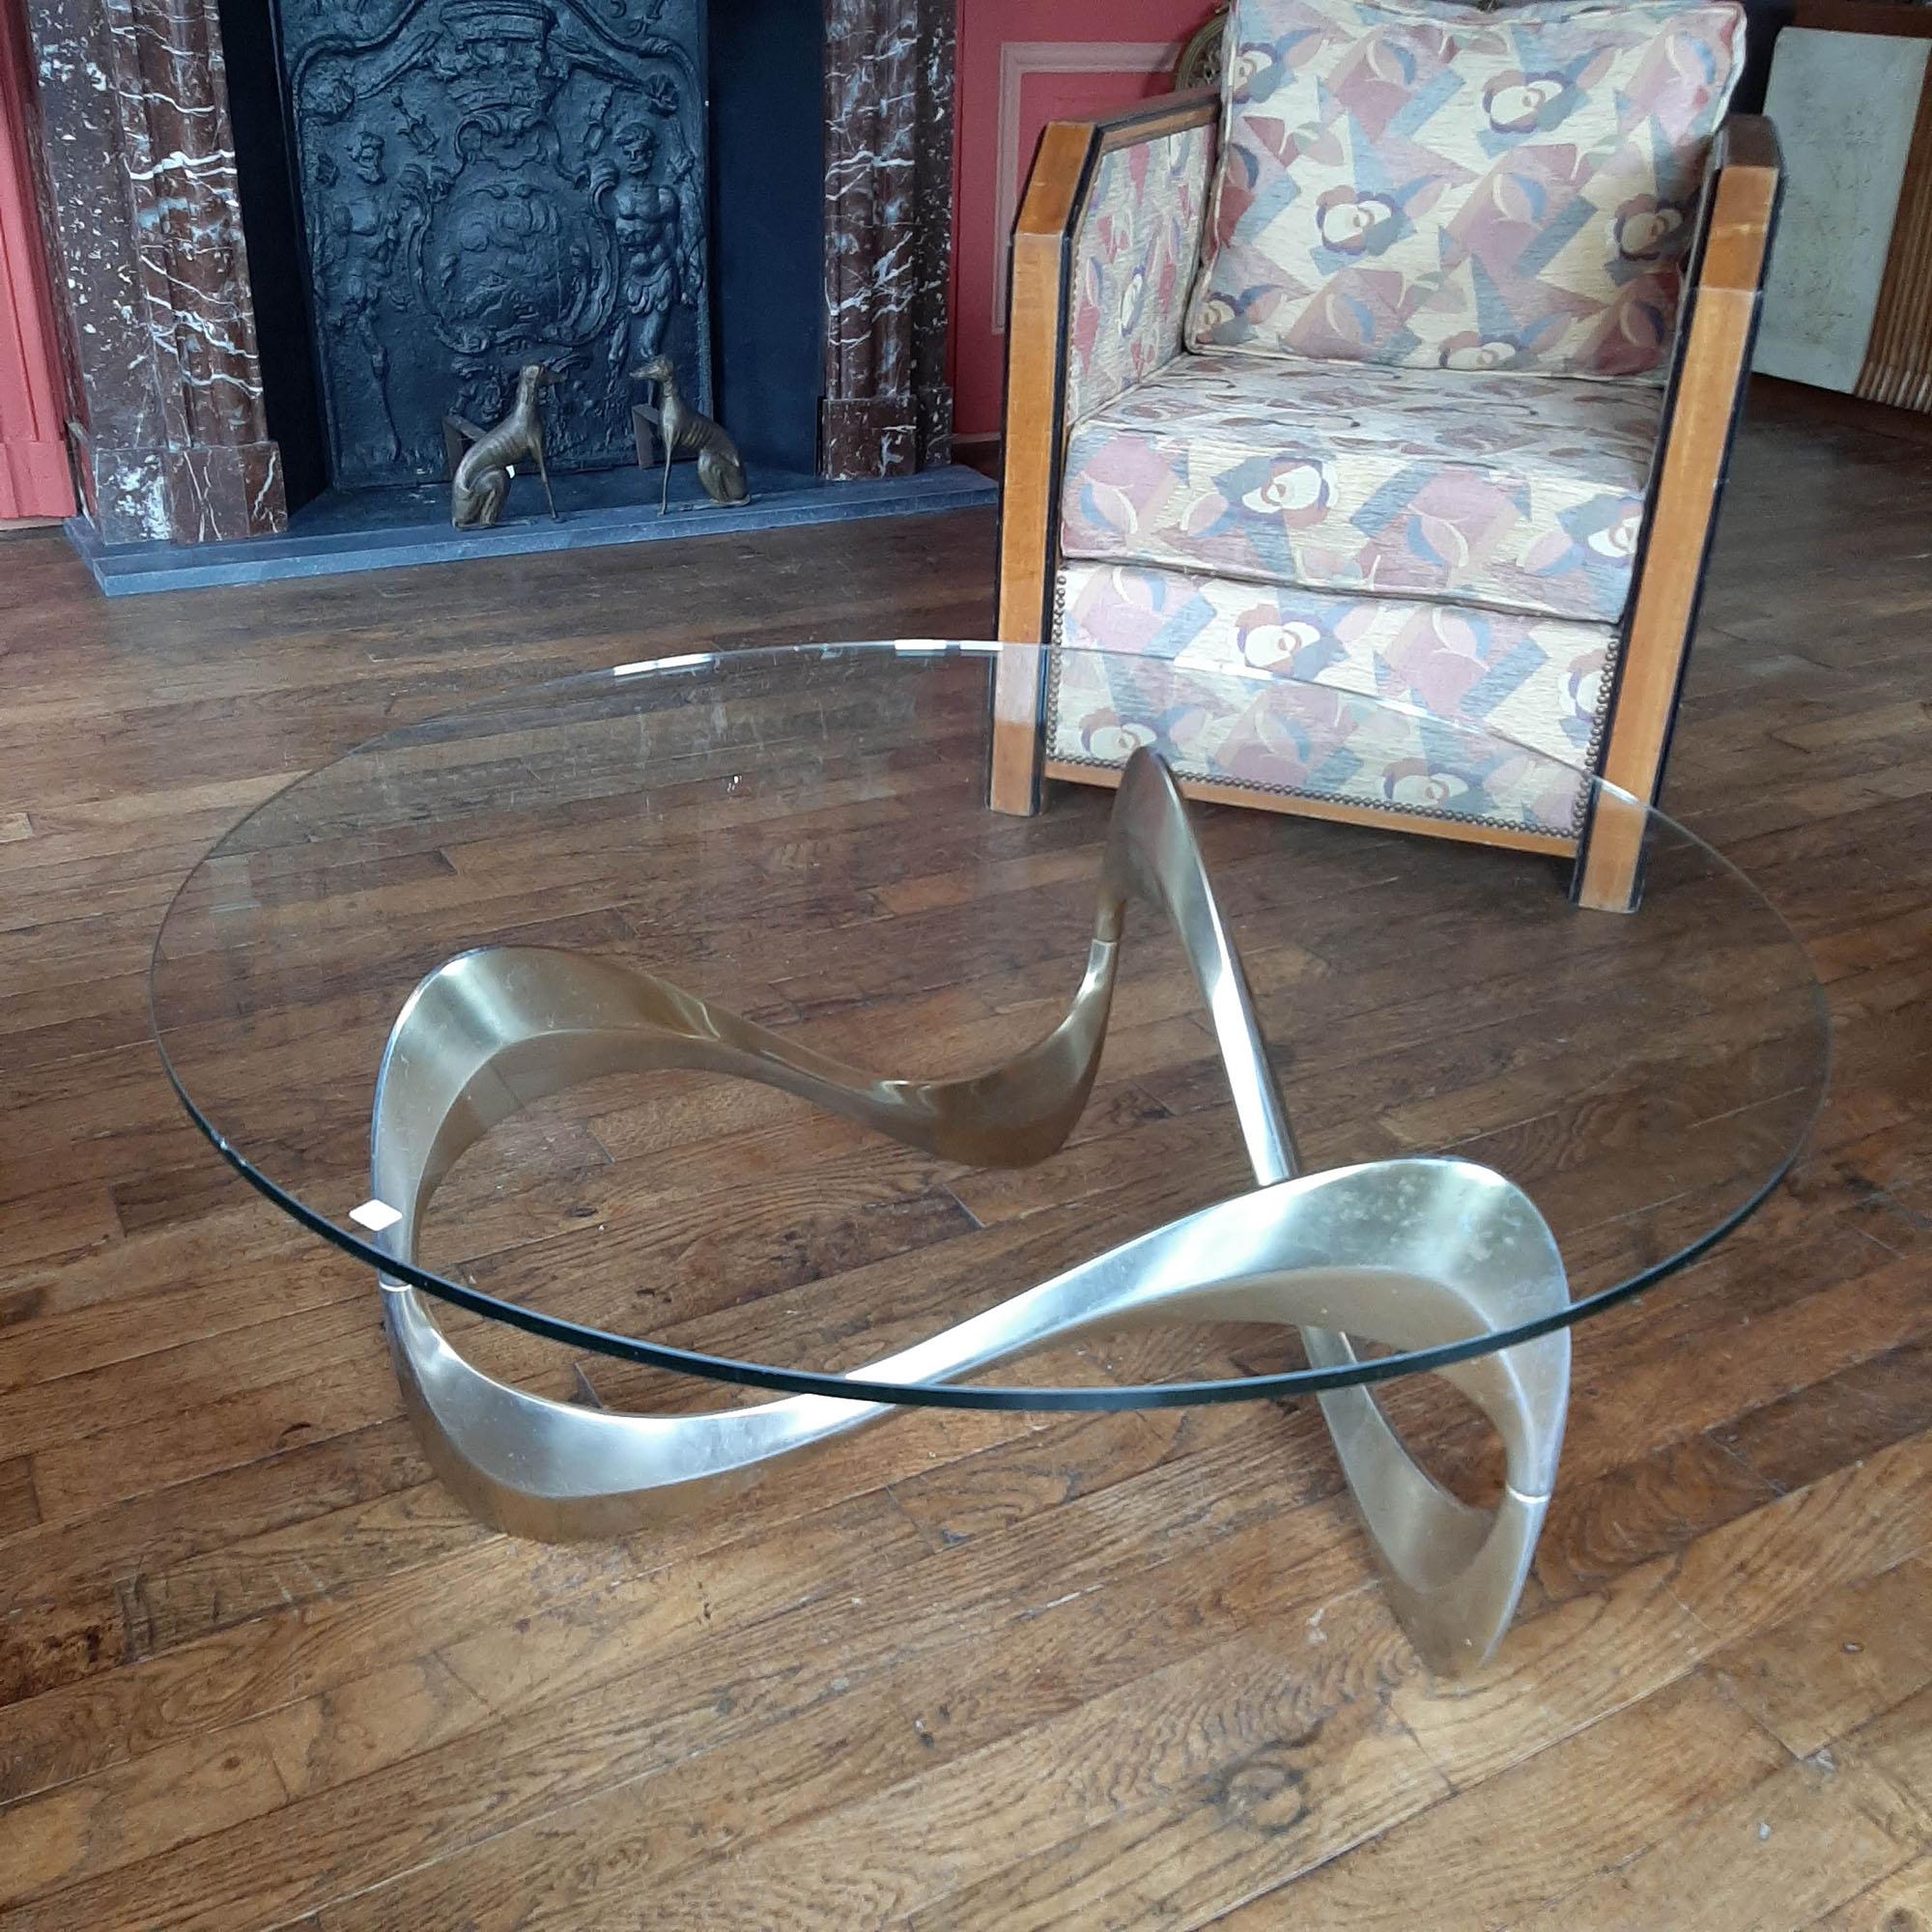 Mid-20th Century Midcentury Aluminum and Glass Coffee Table by Knut Hesterberg from the 1960s